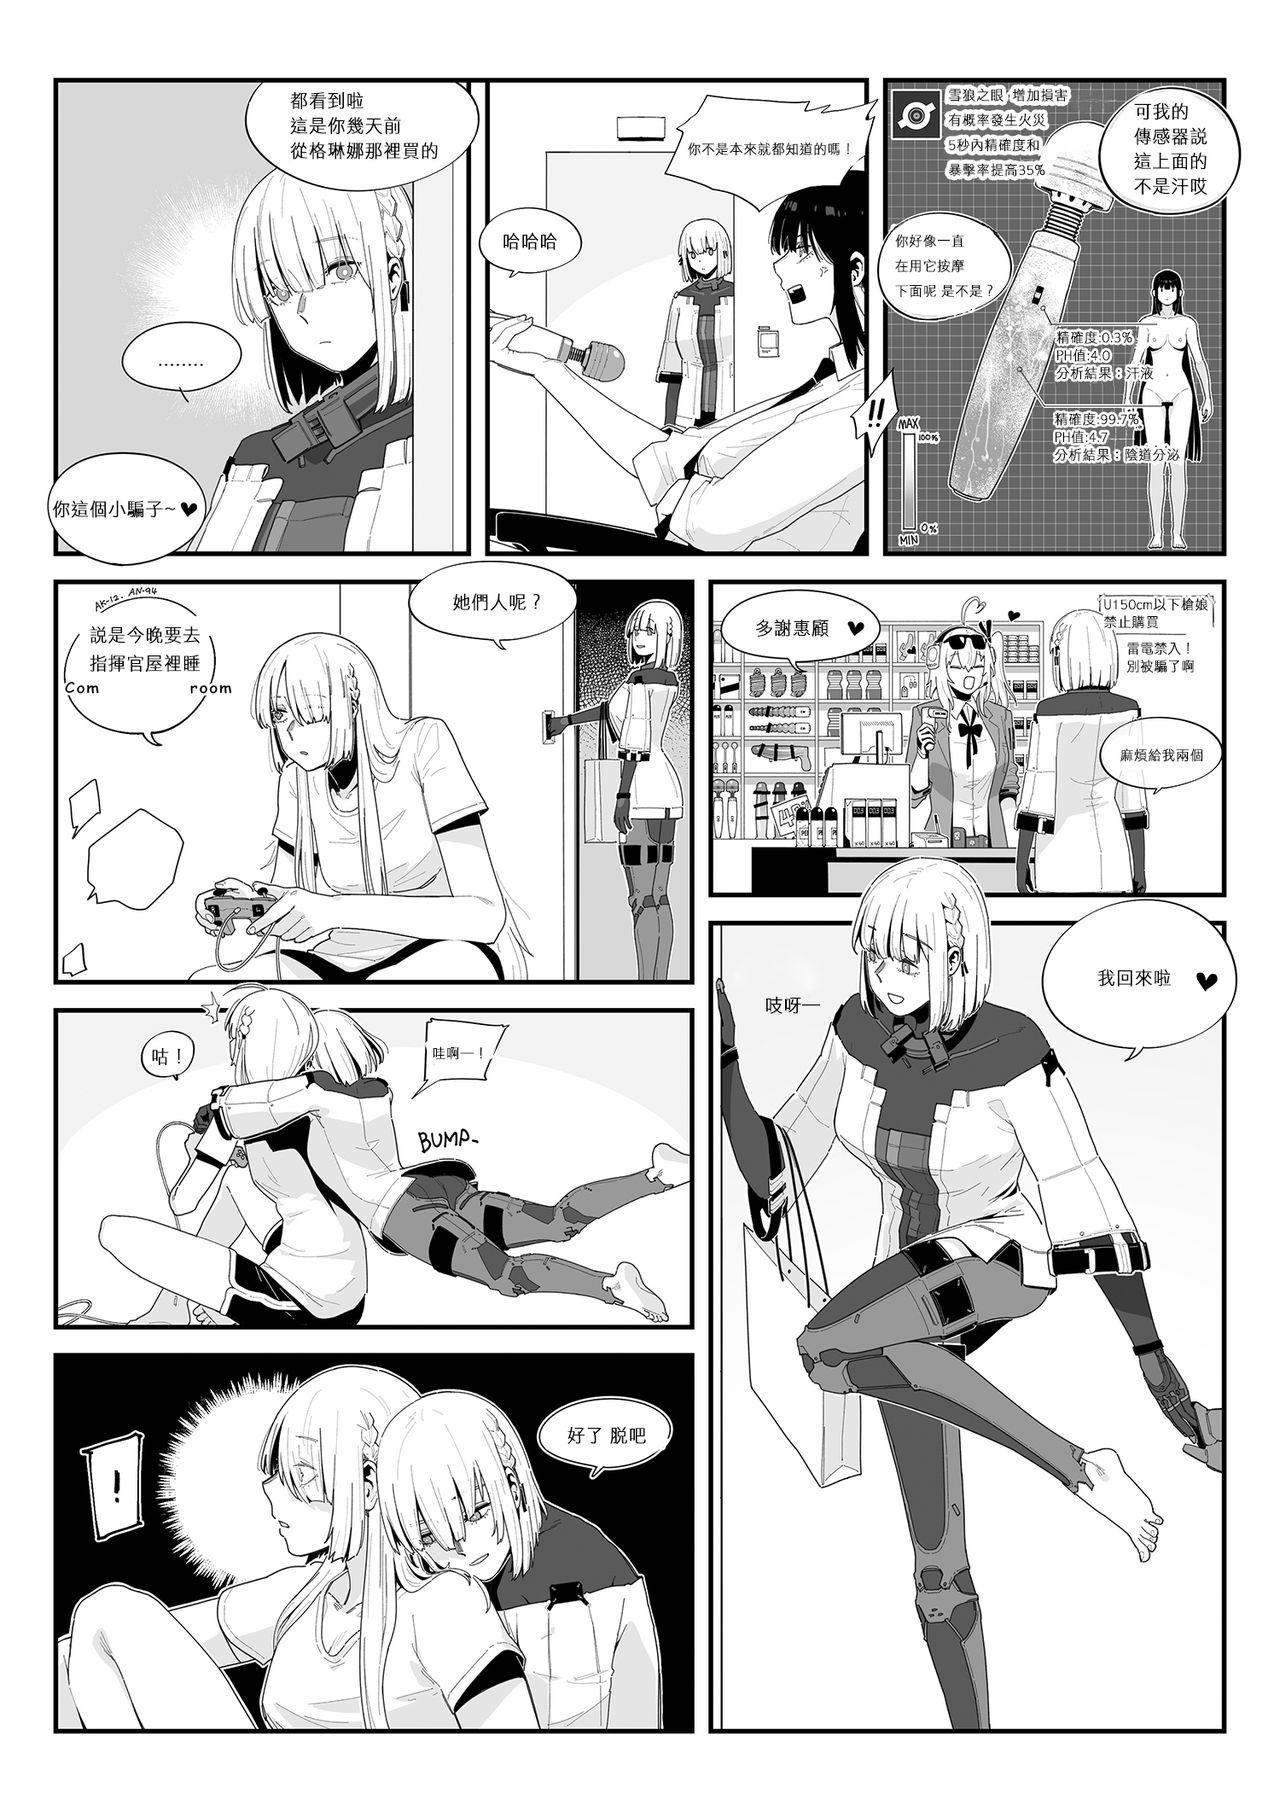 Asstomouth Crazy dog 2 - Girls frontline Penis - Page 3